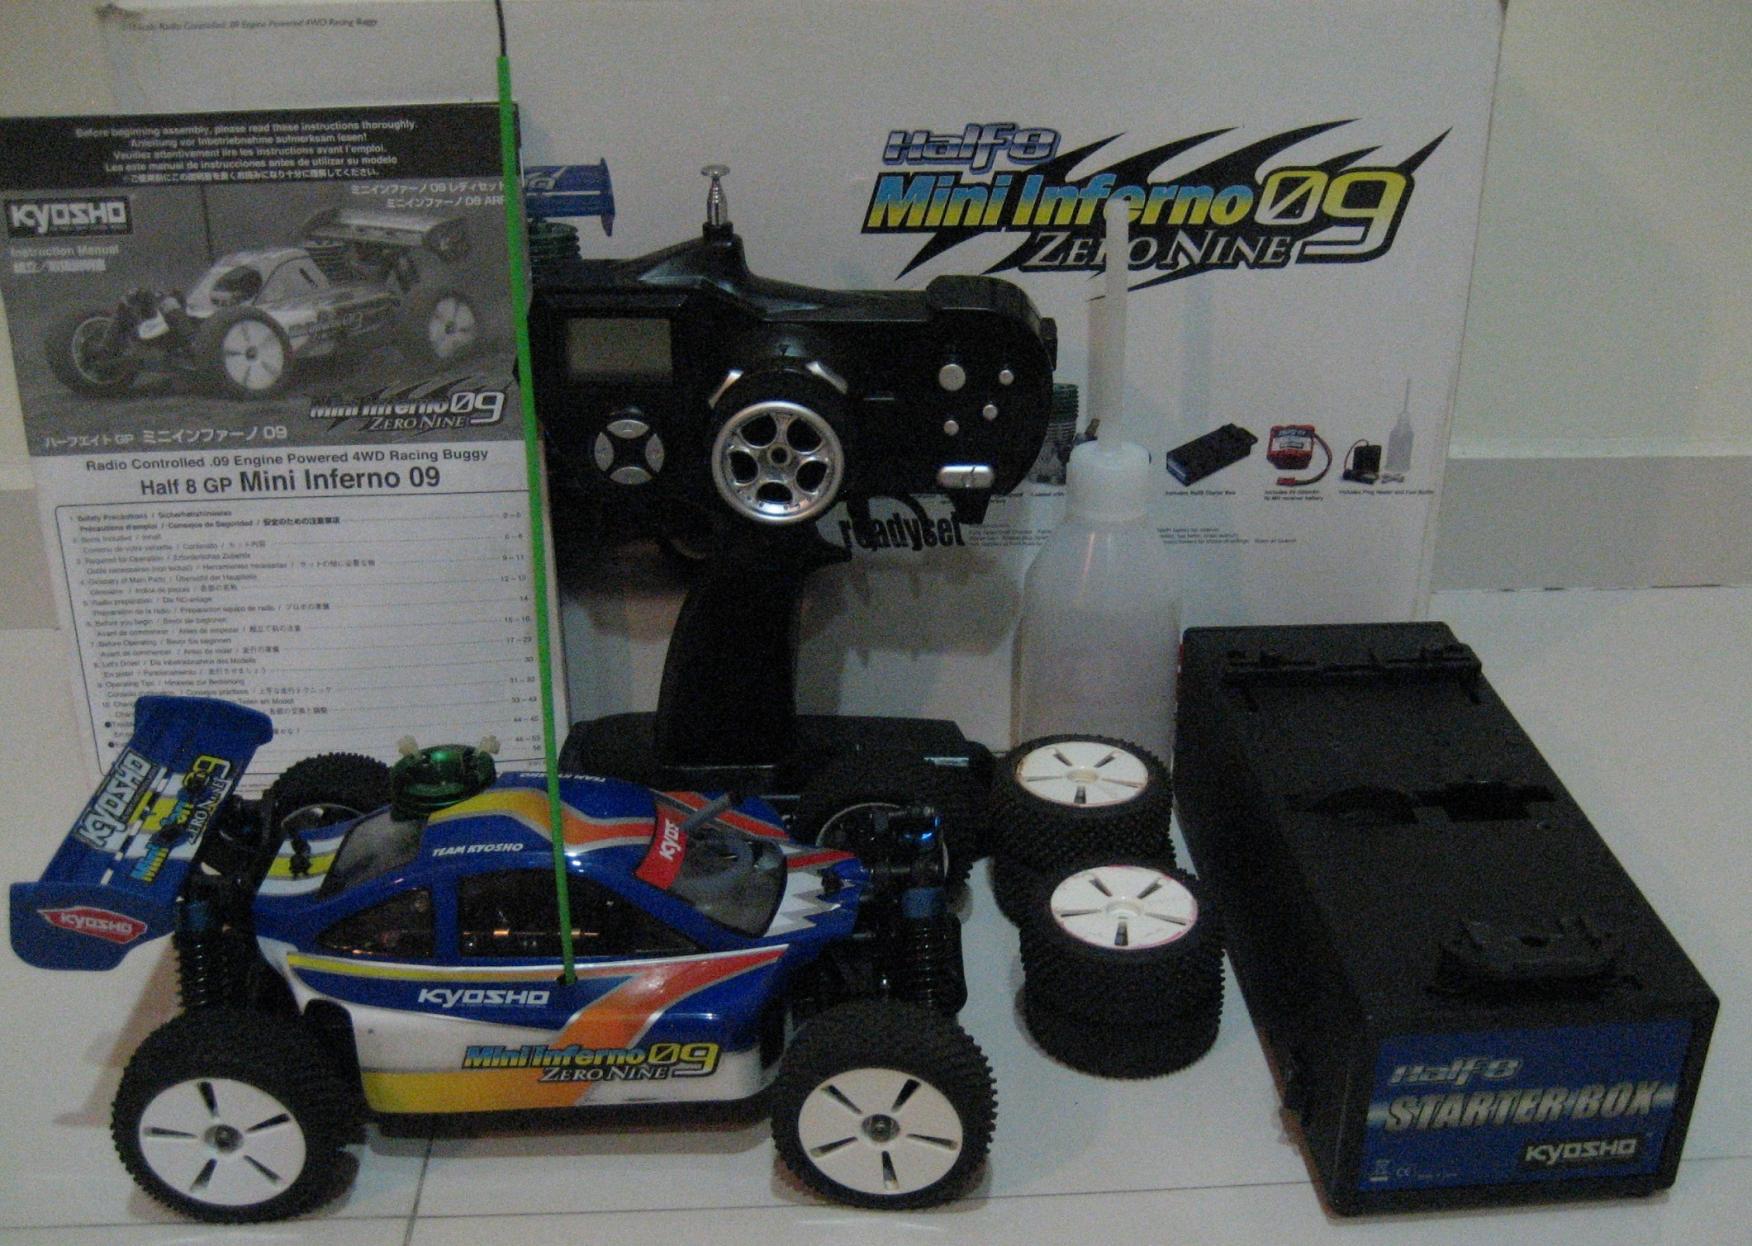 Kyosho Mini Inferno 09 1/16 GP buggy RTR - R/C Tech Forums